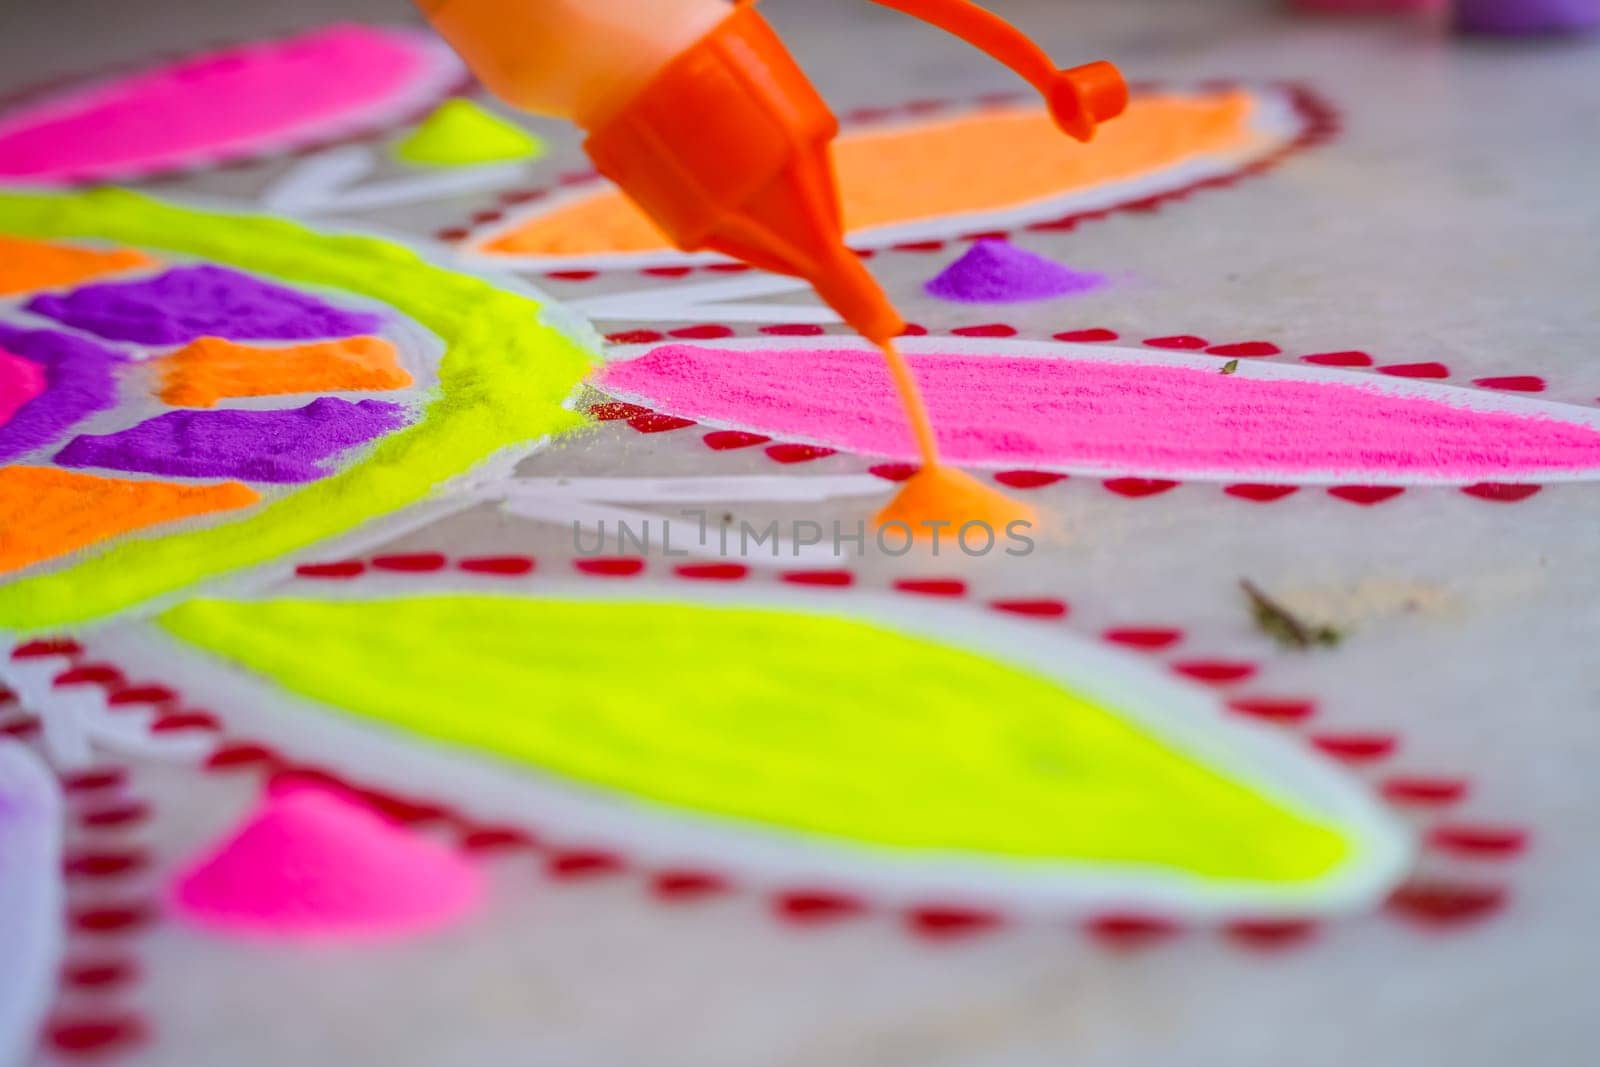 Woman using a bottle of pour a mound of orange color onto the ground to make a colorful rangoli a traditional art made on floors during festivals of diwali, dussera, onam in hindu culture by Shalinimathur